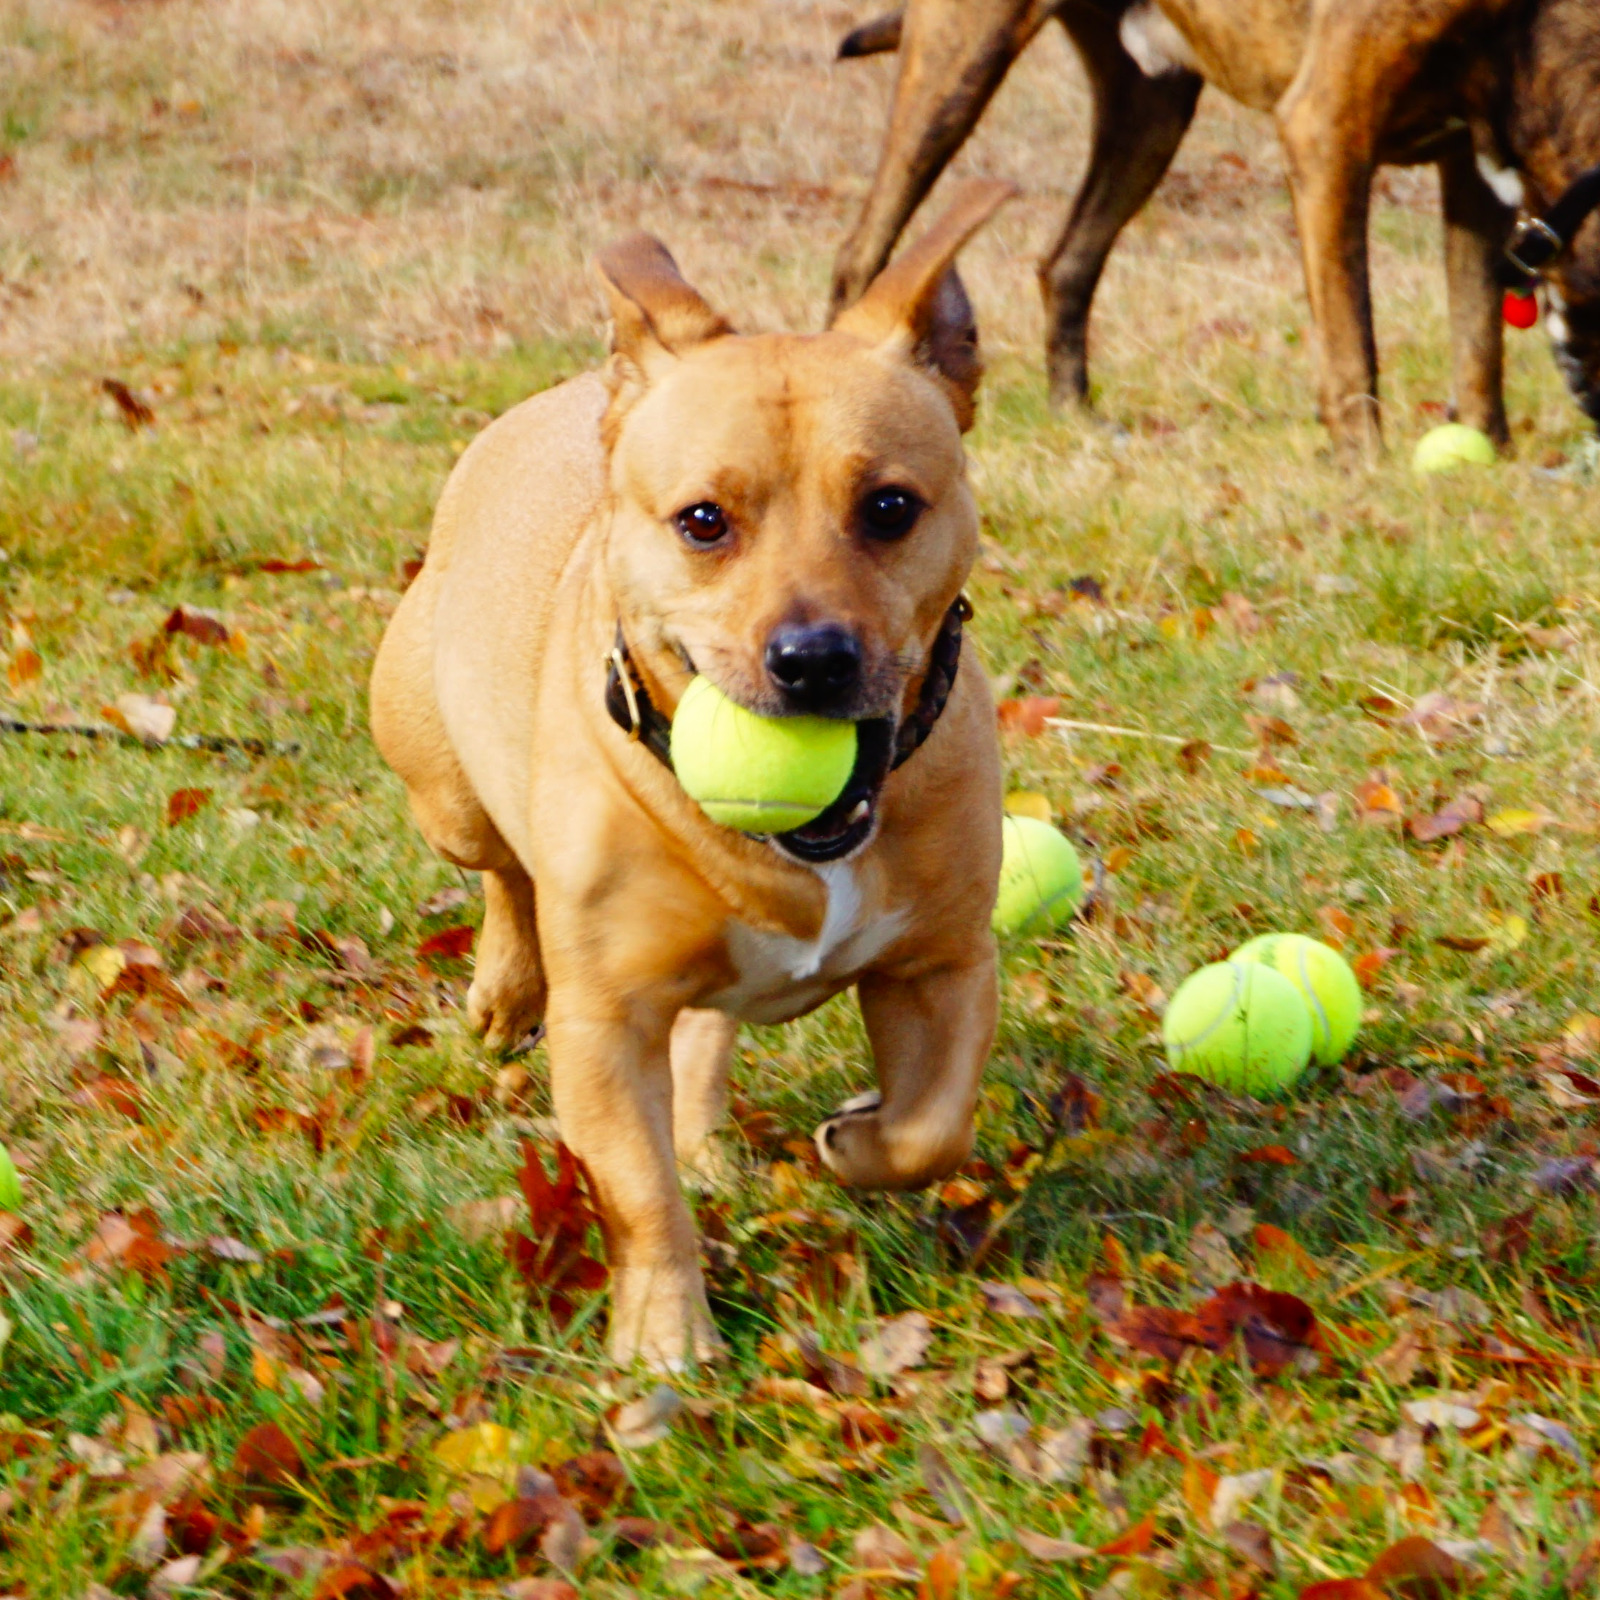 100 Used Tennis Balls - LOW COST DOGGIE BALLS -  FREE SHIPPING - SAVE 10%